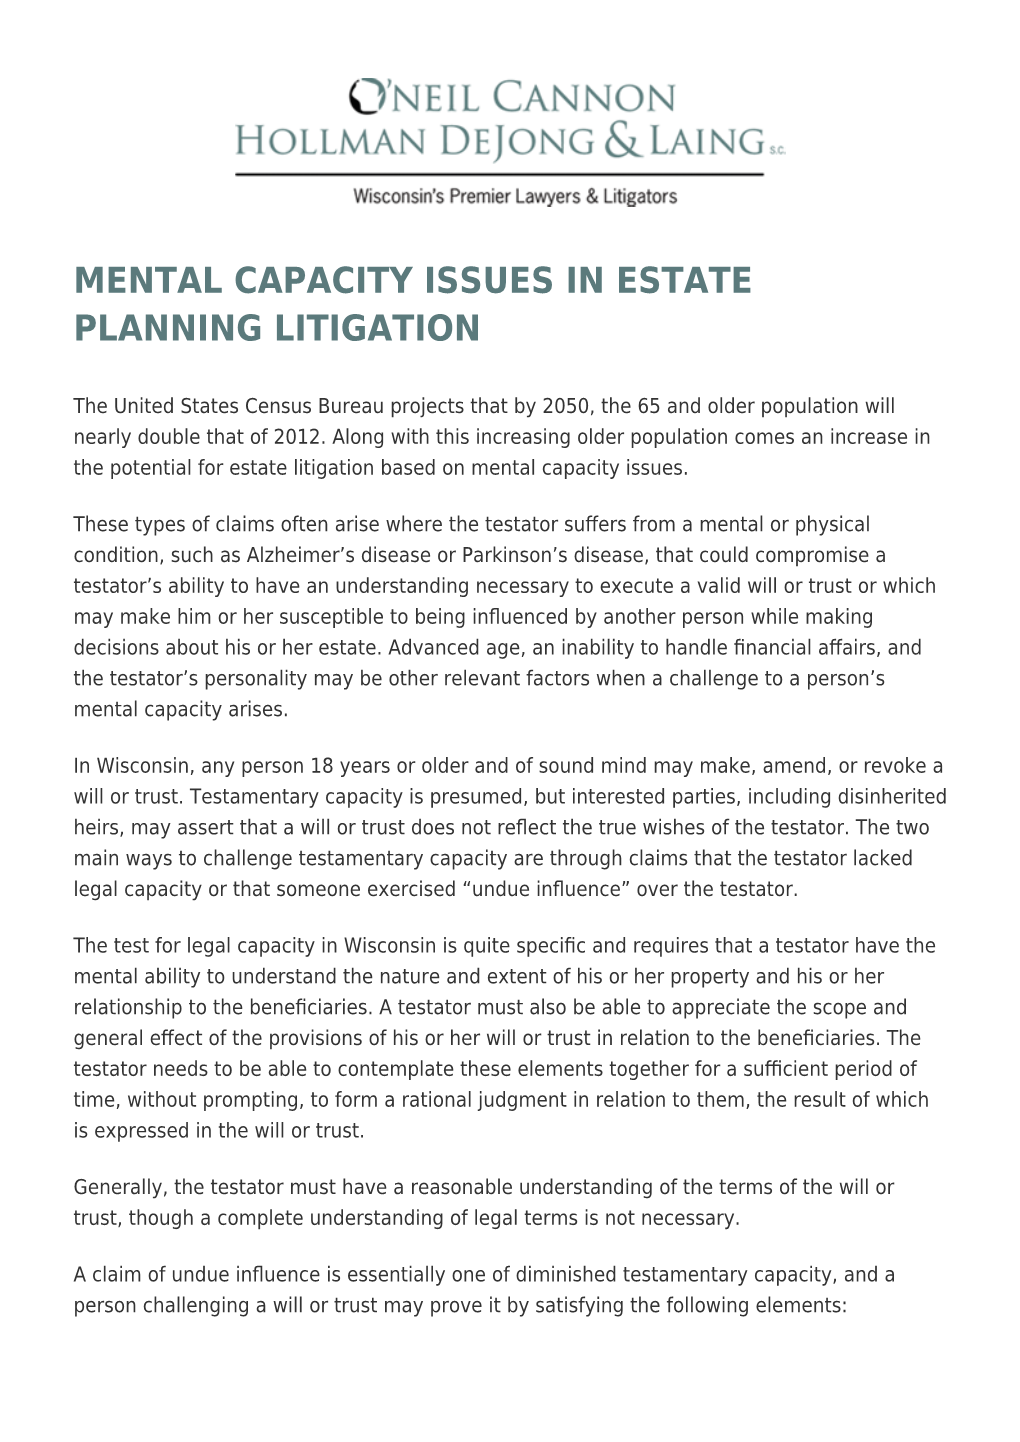 Mental Capacity Issues in Estate Planning Litigation